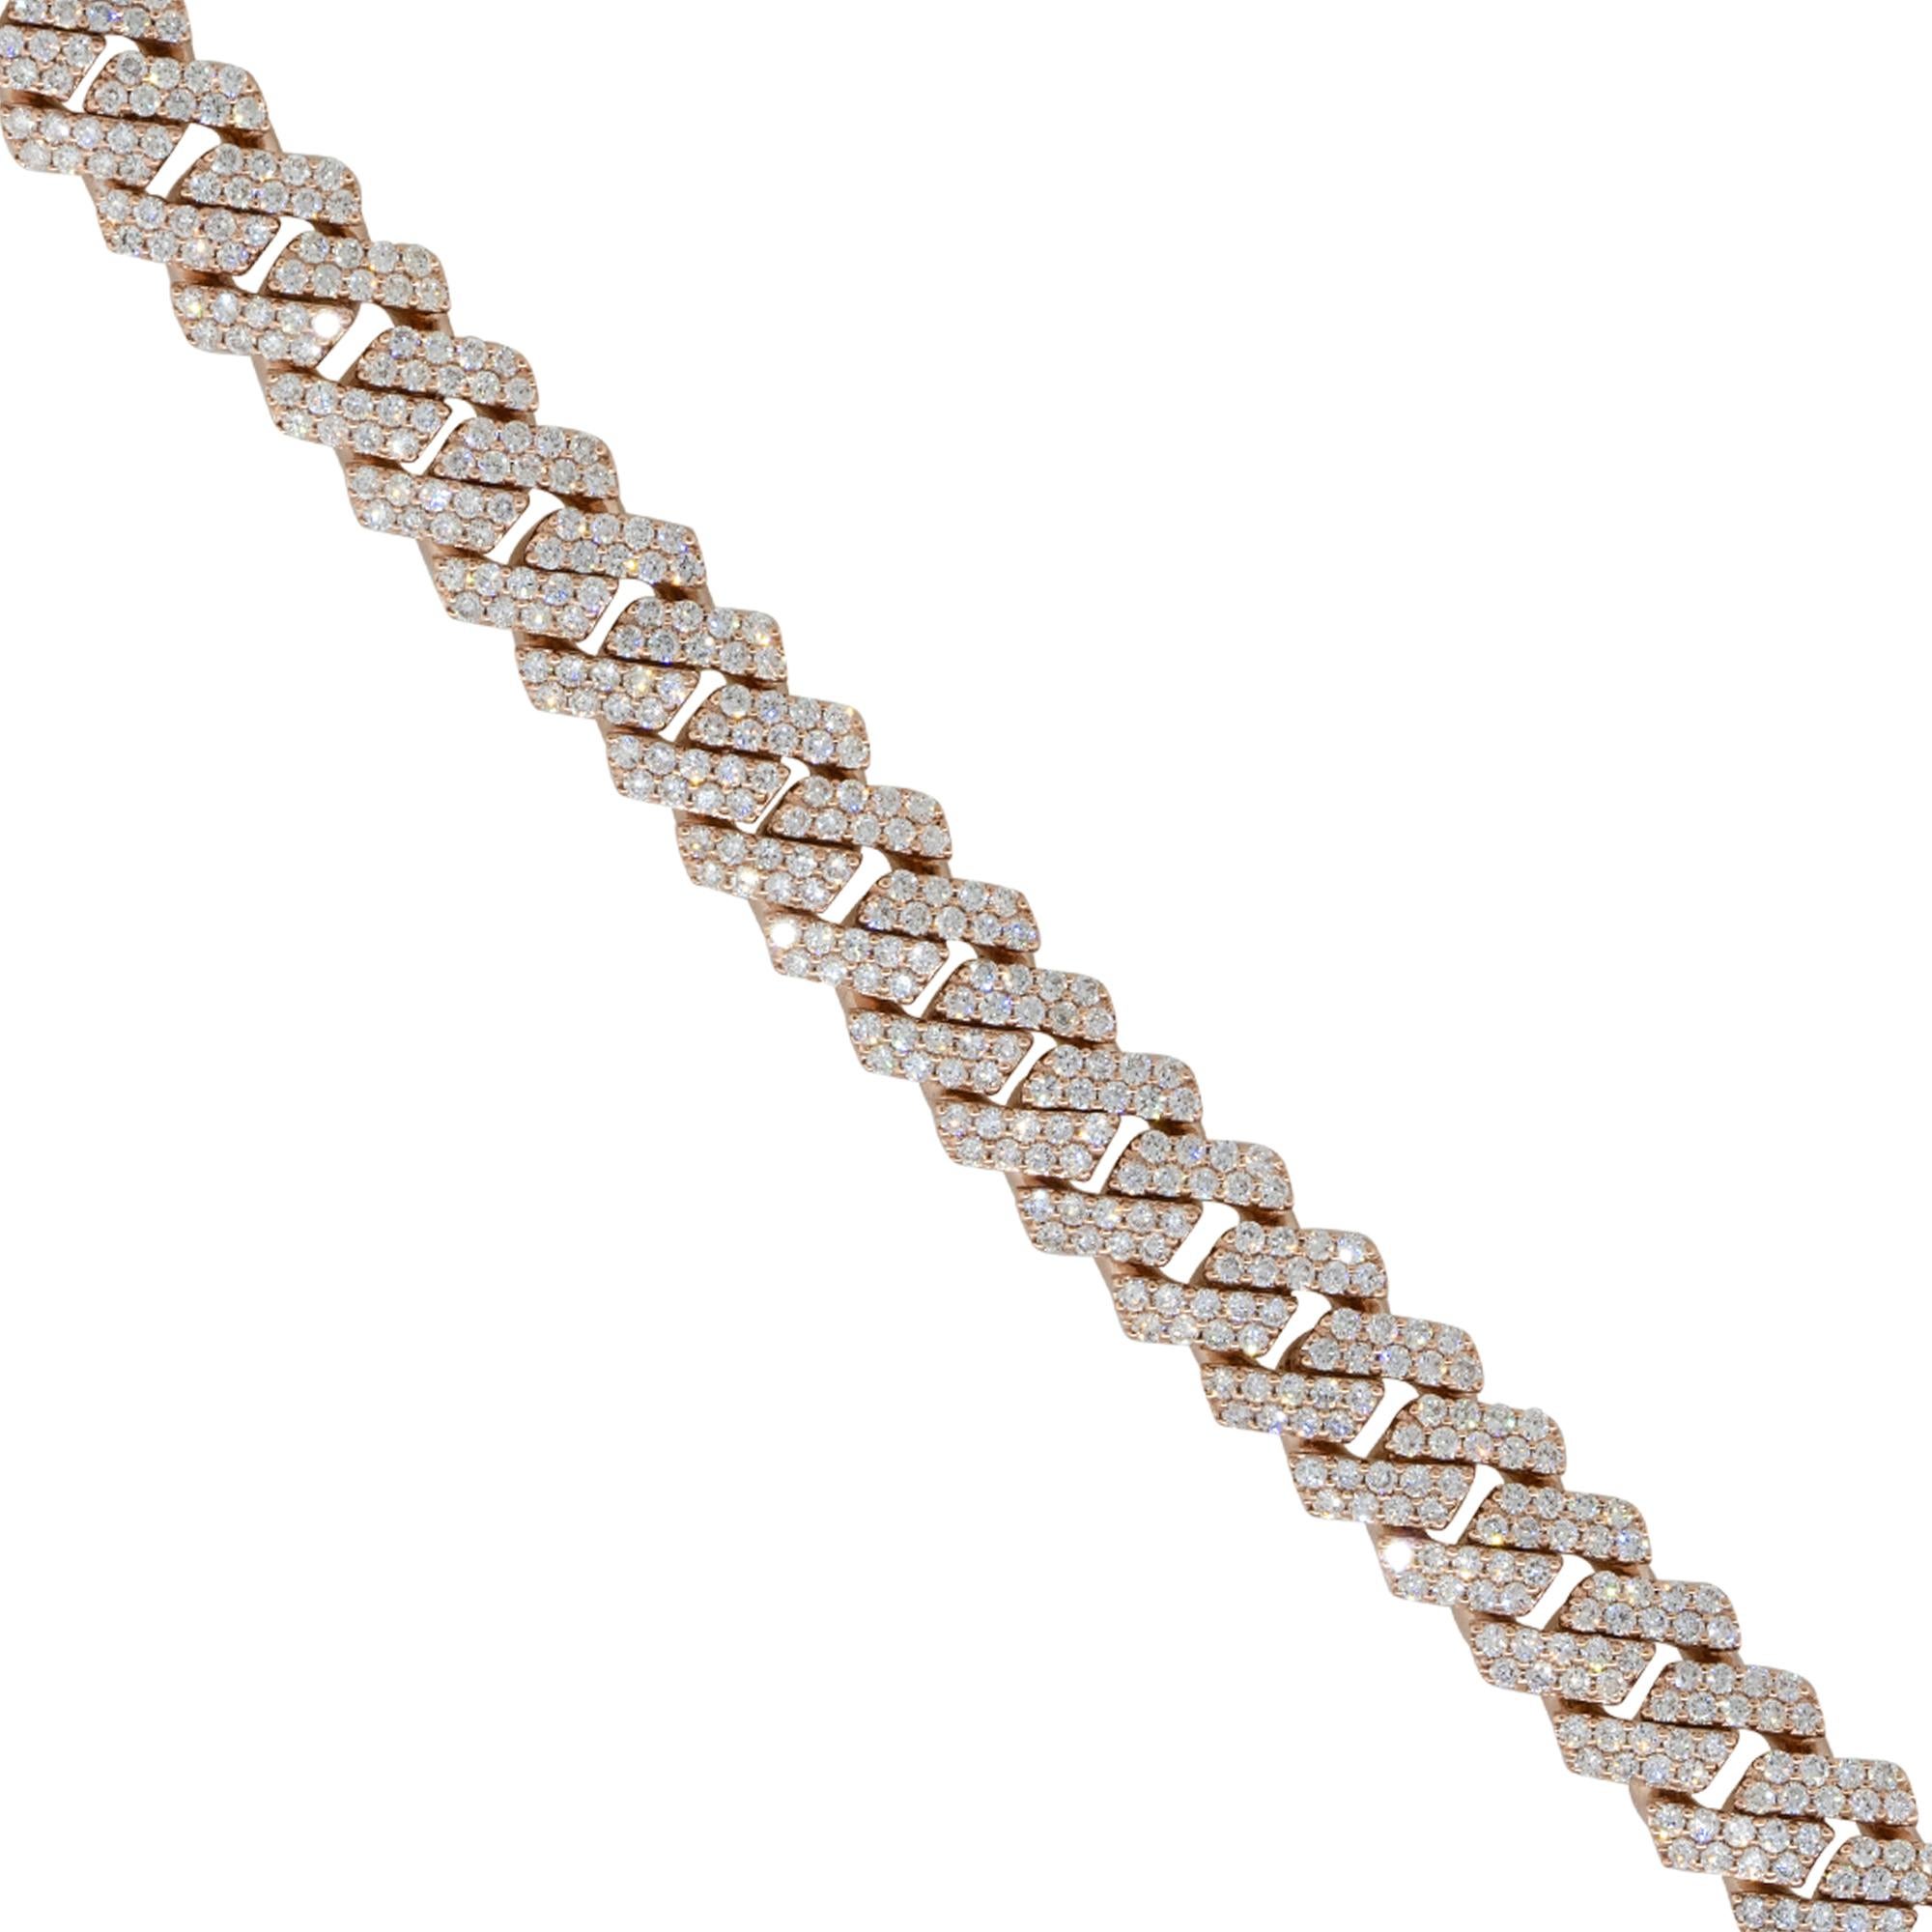 Material: 10k rose gold
Diamond Details: Approx. 9.92ctw of round cut Diamonds. Diamonds are G/H in color and VS in clarity. 709 stones 
Clasp: Tongue in box with double safety latch
Measurements: measures 8